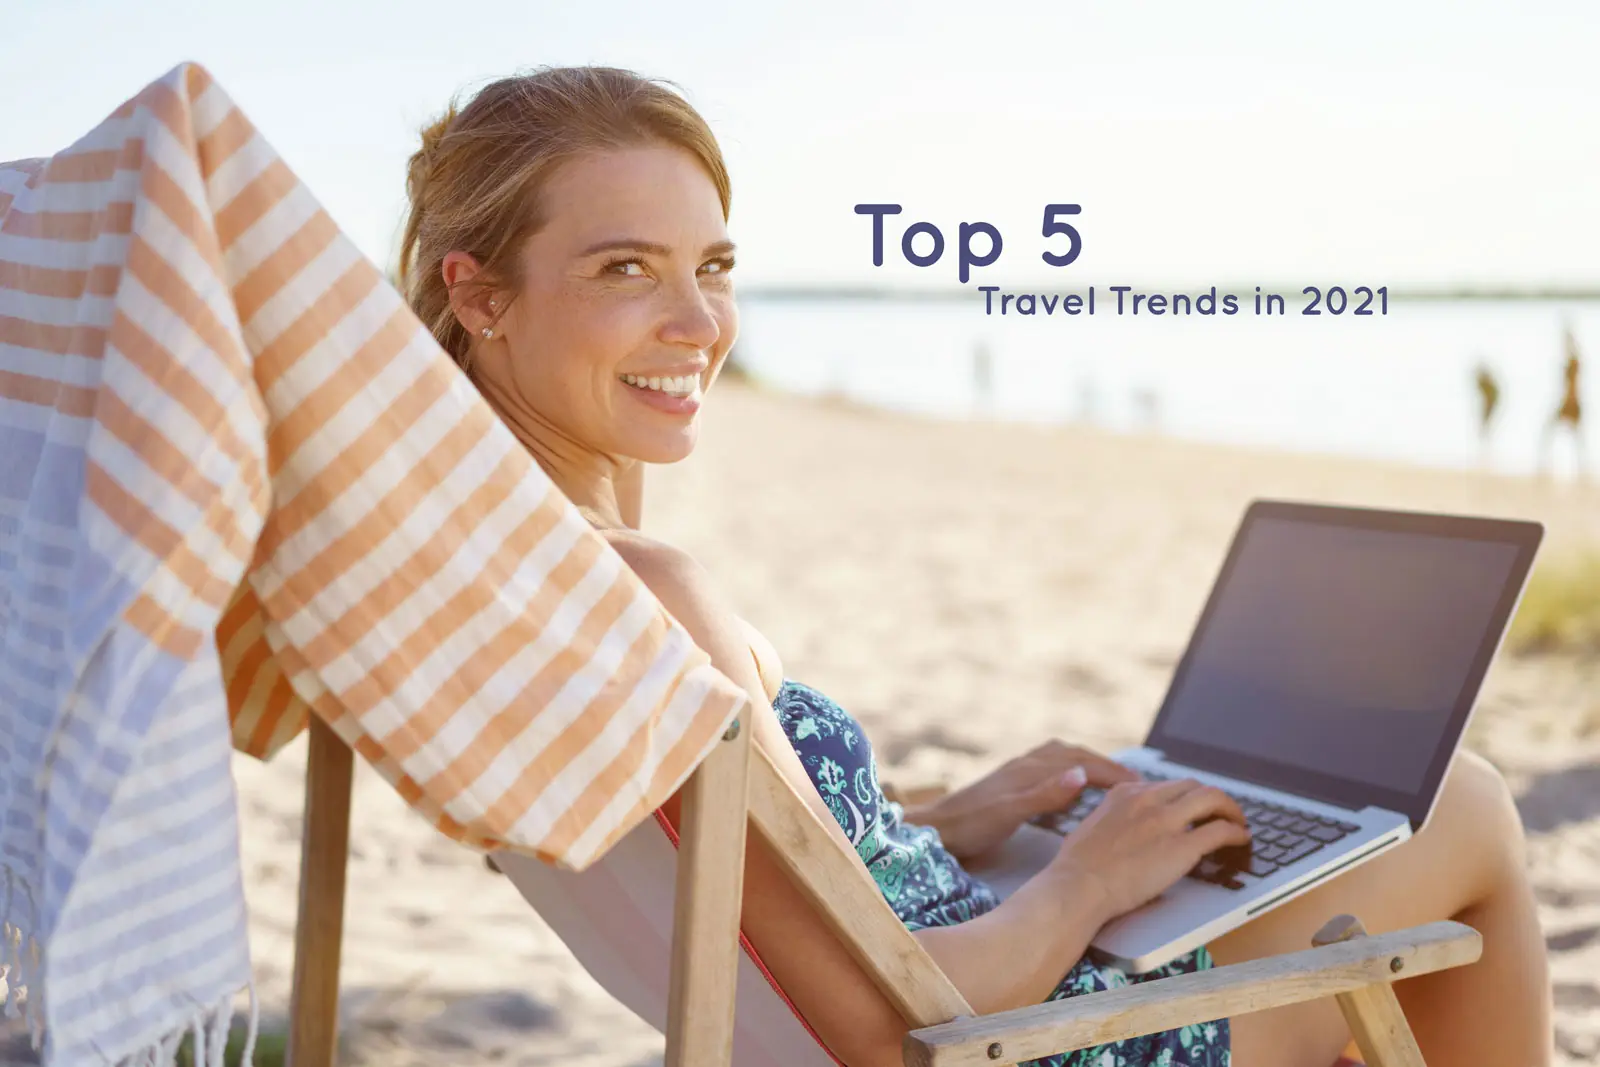 The Top 5 Travel Trends in 2021